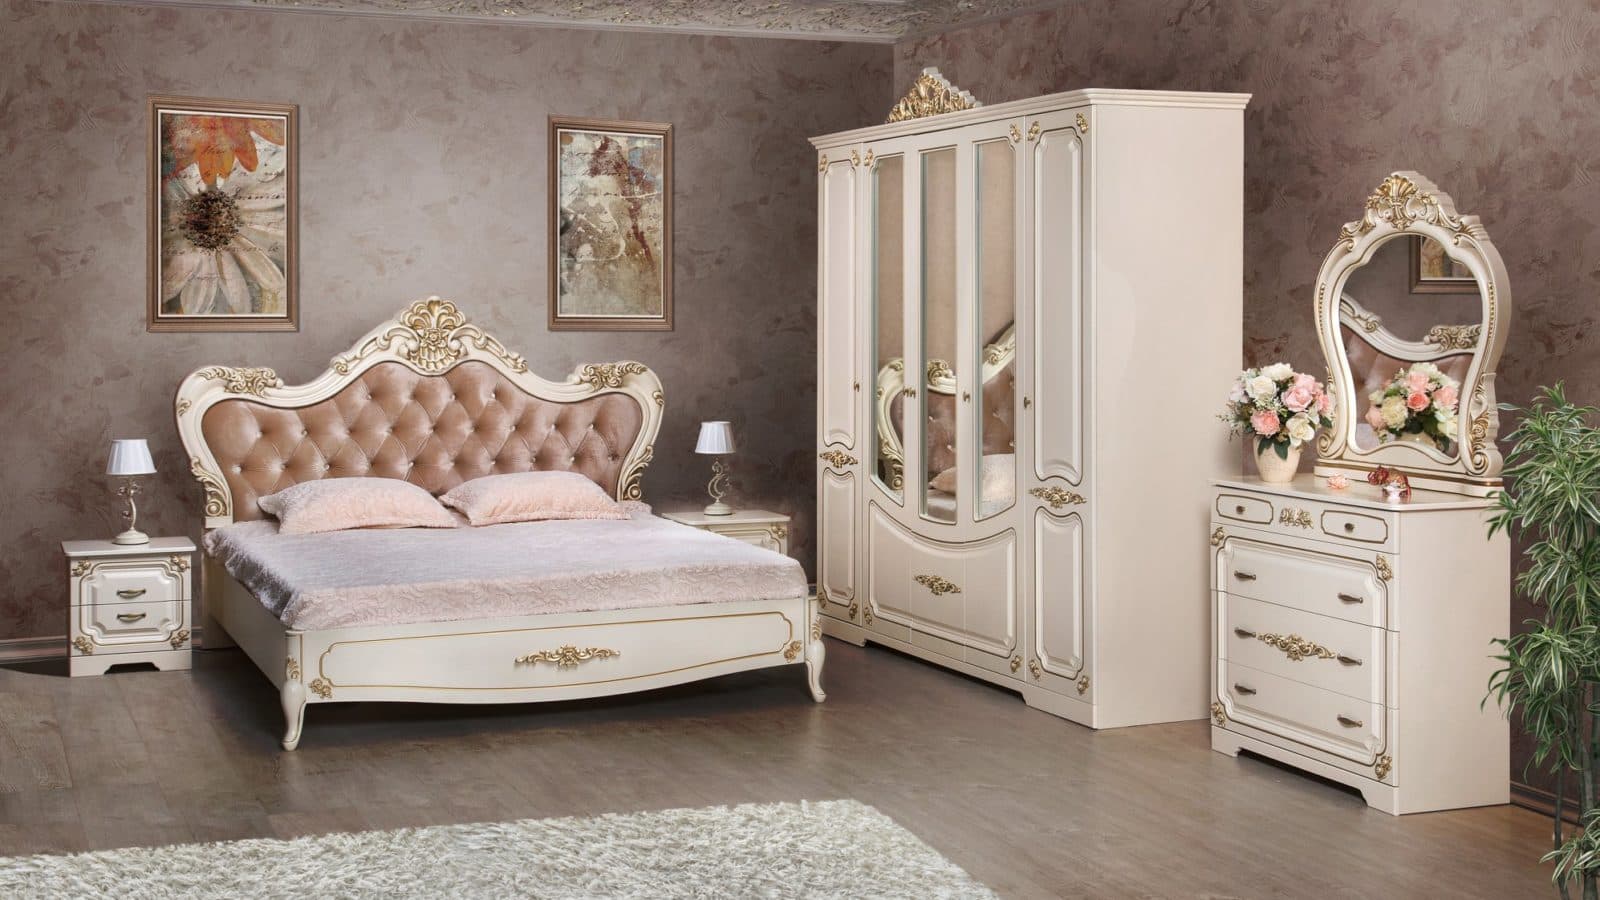 Bedroom Magdalena | Furniture factory "SKFM". Furniture from the manufacturer in Moscow